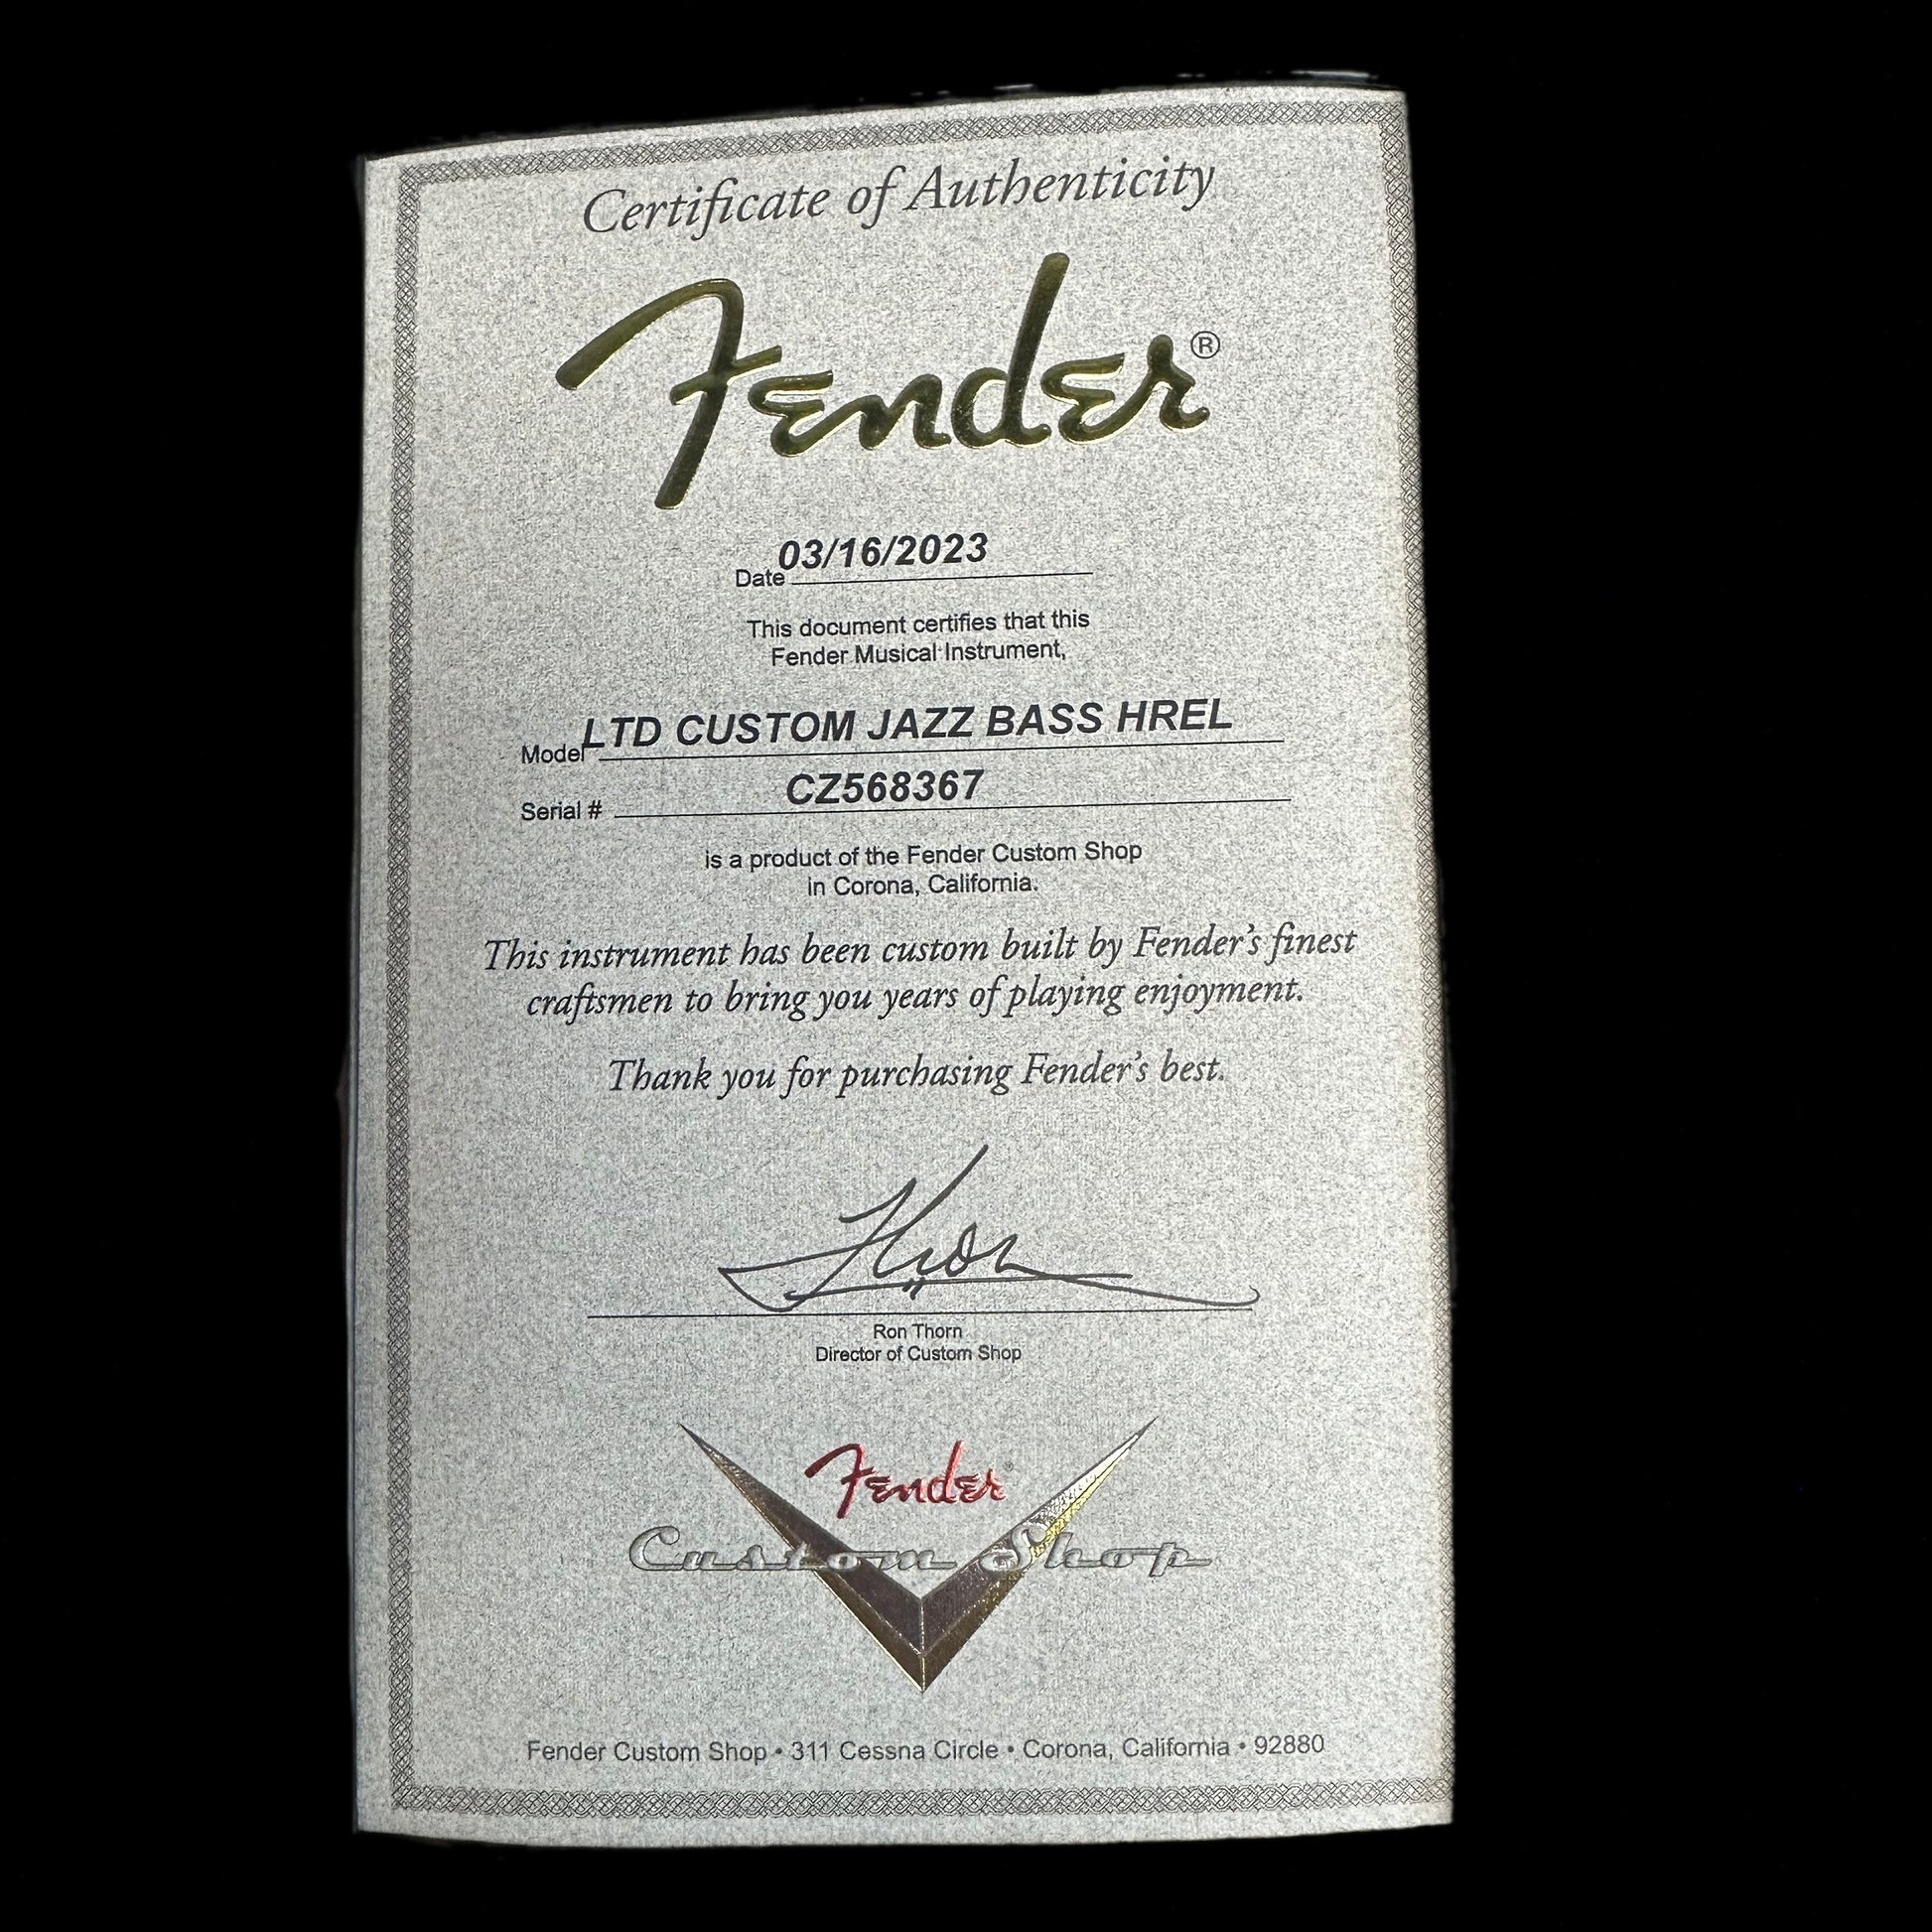 Fender Custom Shop Limited Edition Custom Jazz Bass Heavy Relic Aged Black Certificate of Authenticity.